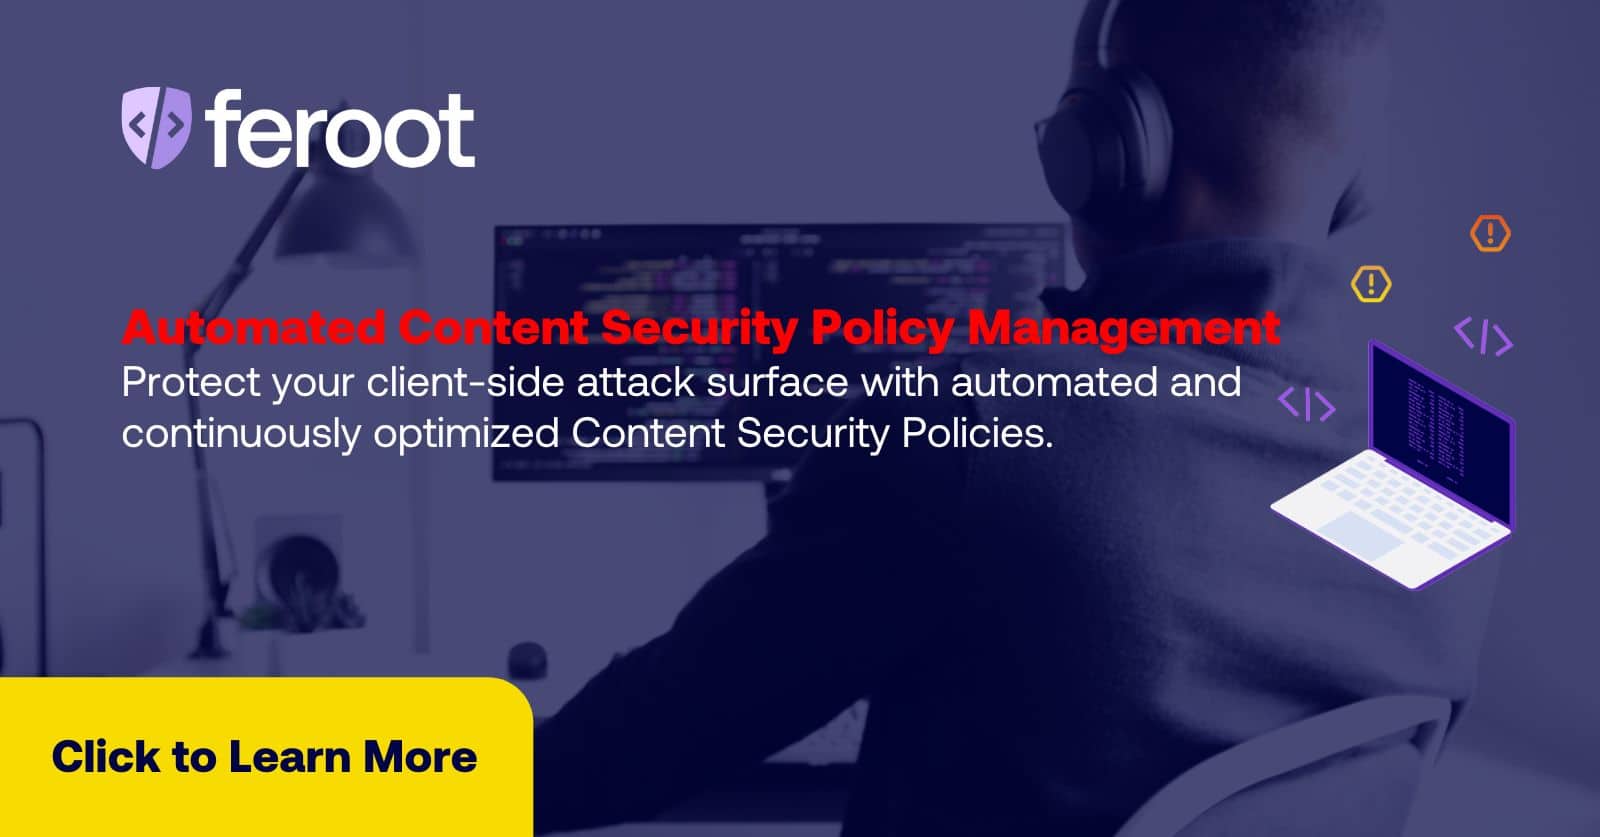 Automated Content Security Policy Management. Protect your client-side attack surface with automated and continuously optimized Content Security Policies.